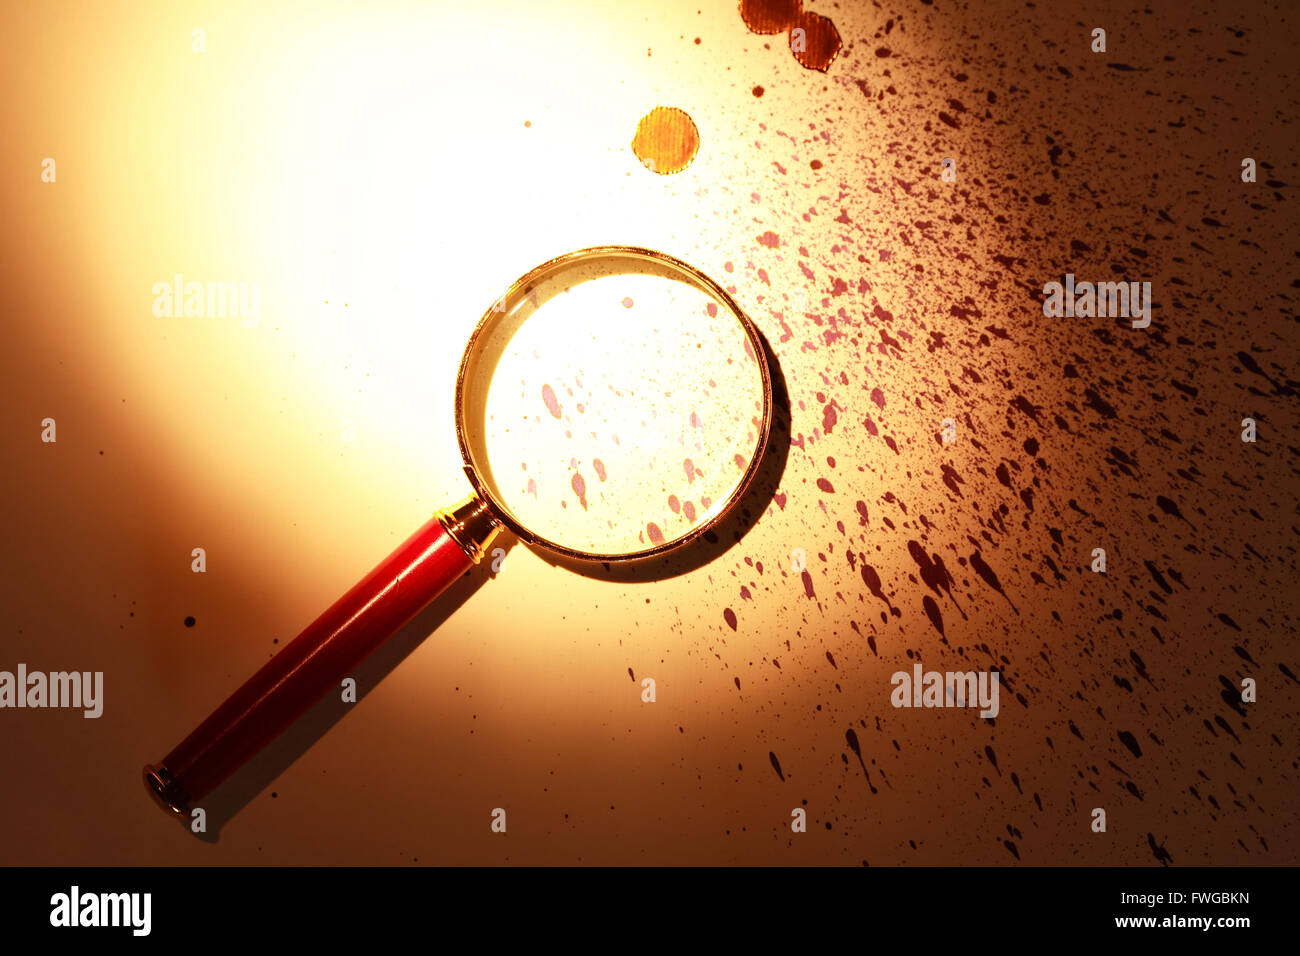 Investigation symbol. Magnifying glass on paper background with drops Stock Photo